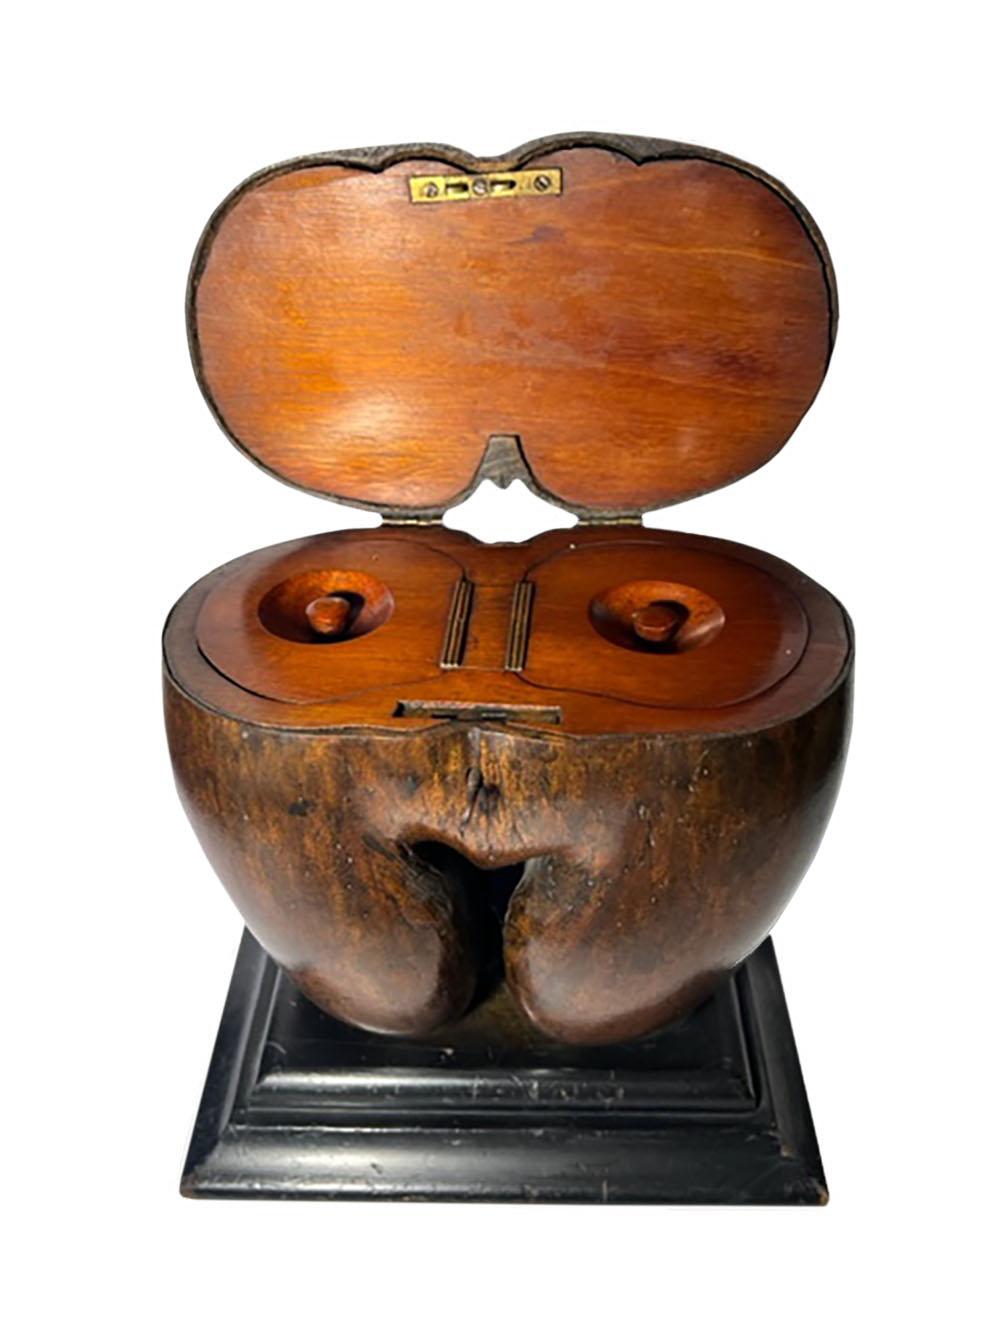 Coco de Mer nut from a tree in the Seychelles islands. Collected specimen made into a tea caddy in England, circa 1860.